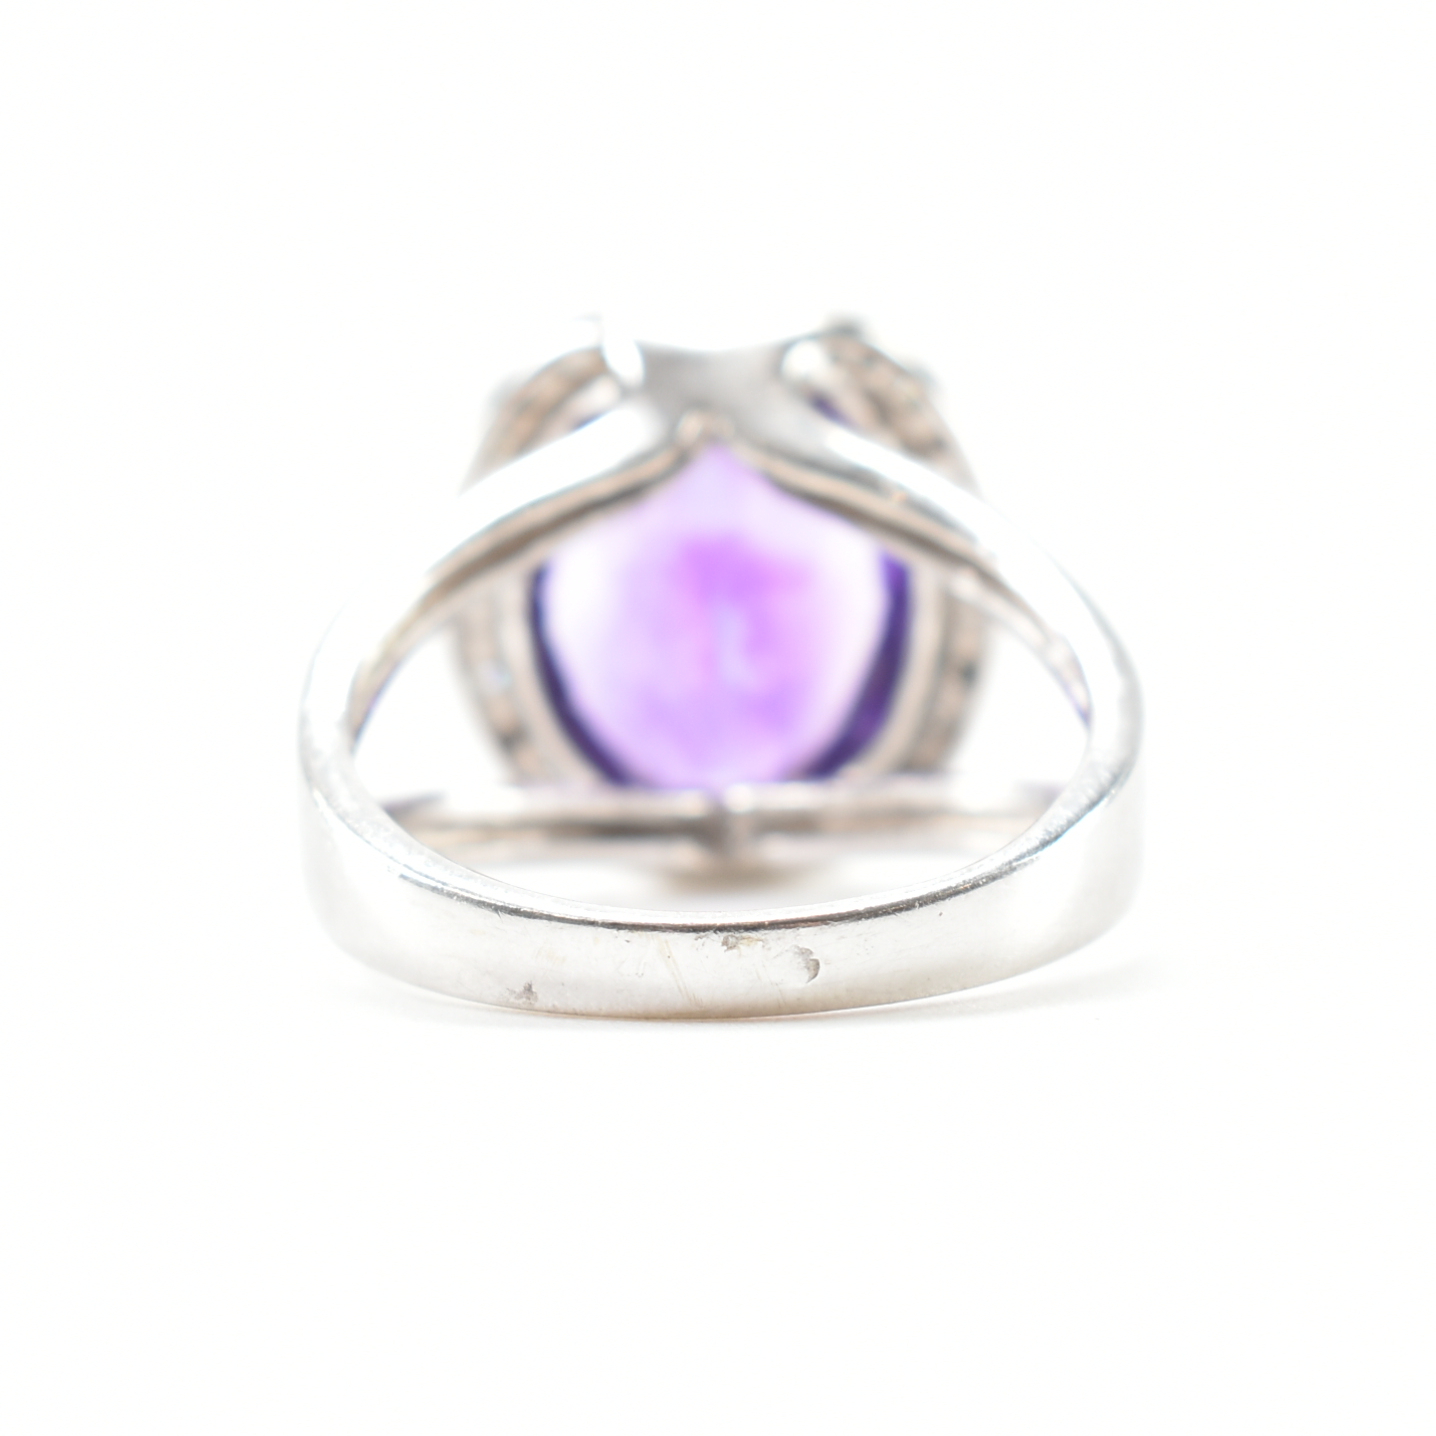 FRENCH 18CT WHITE GOLD AMETHYST & DIAMOND COCKTAIL RING - Image 3 of 9